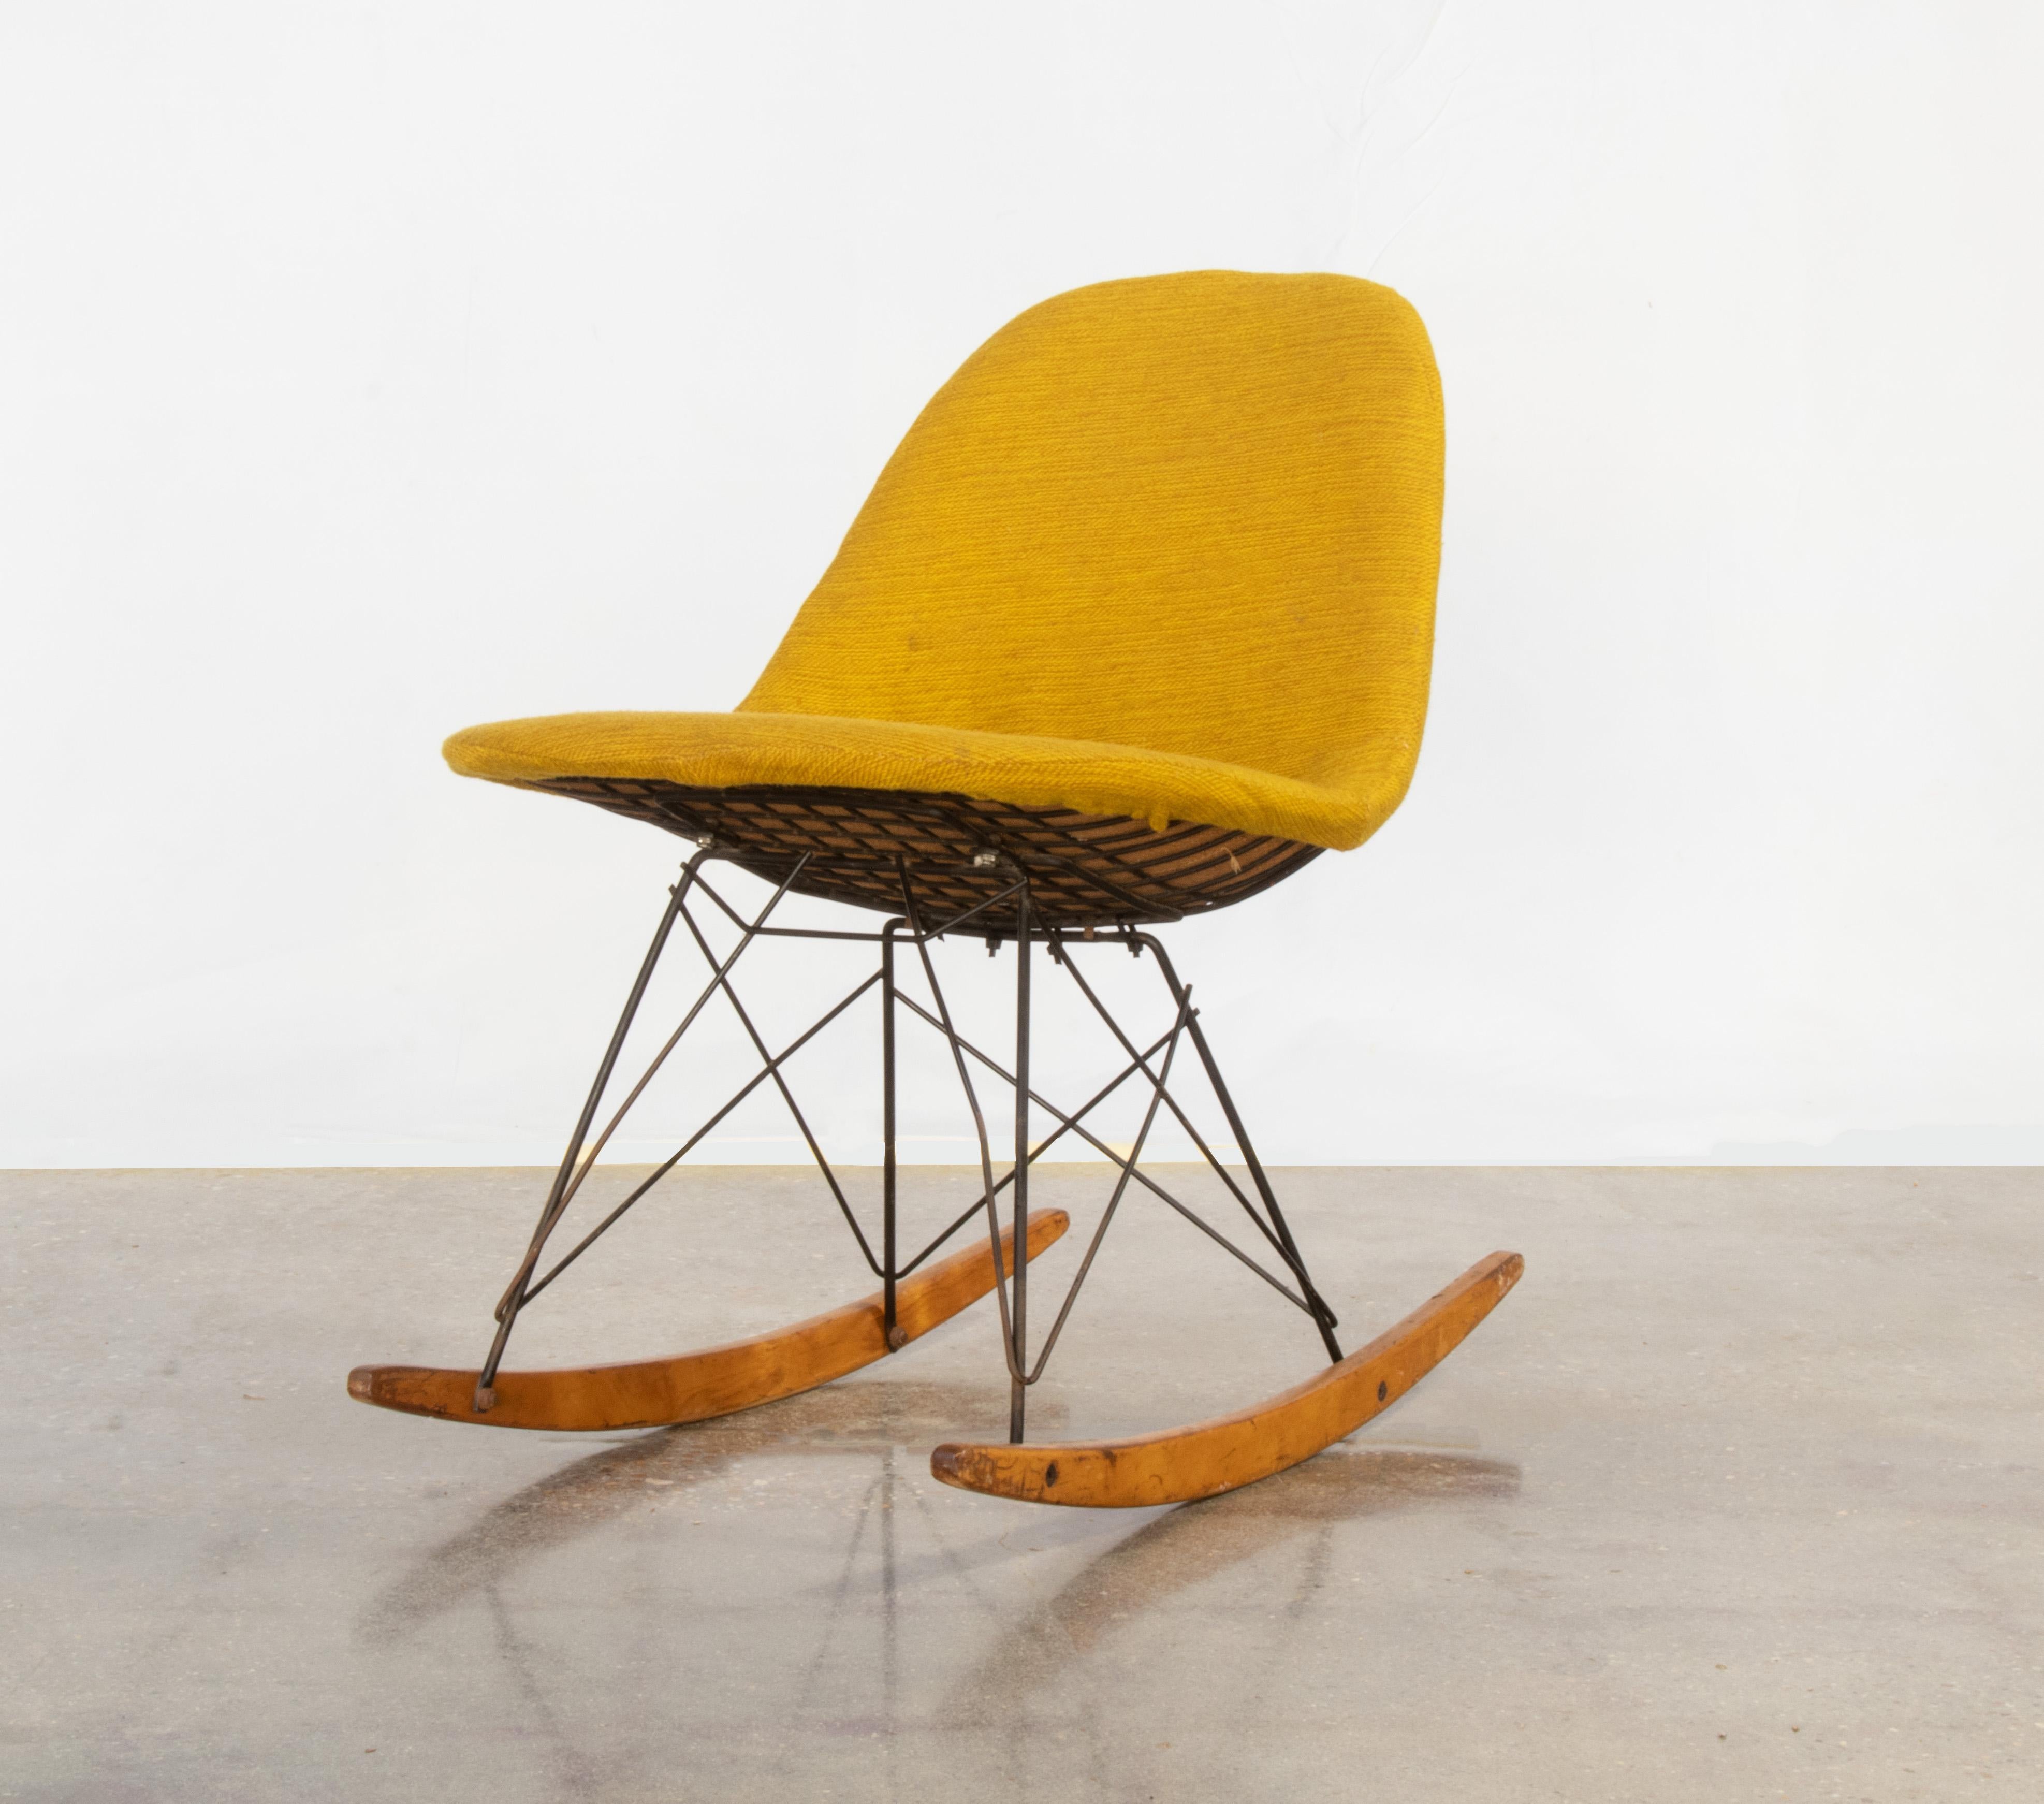 An iconic RKR Rocking wire side chair designed by Charles and Ray Eames for Herman Miller. This chair retains its original birch runners and original yellow hopsak fabric. The black iron frame pops off the vibrant yellow.  Hard to find these with